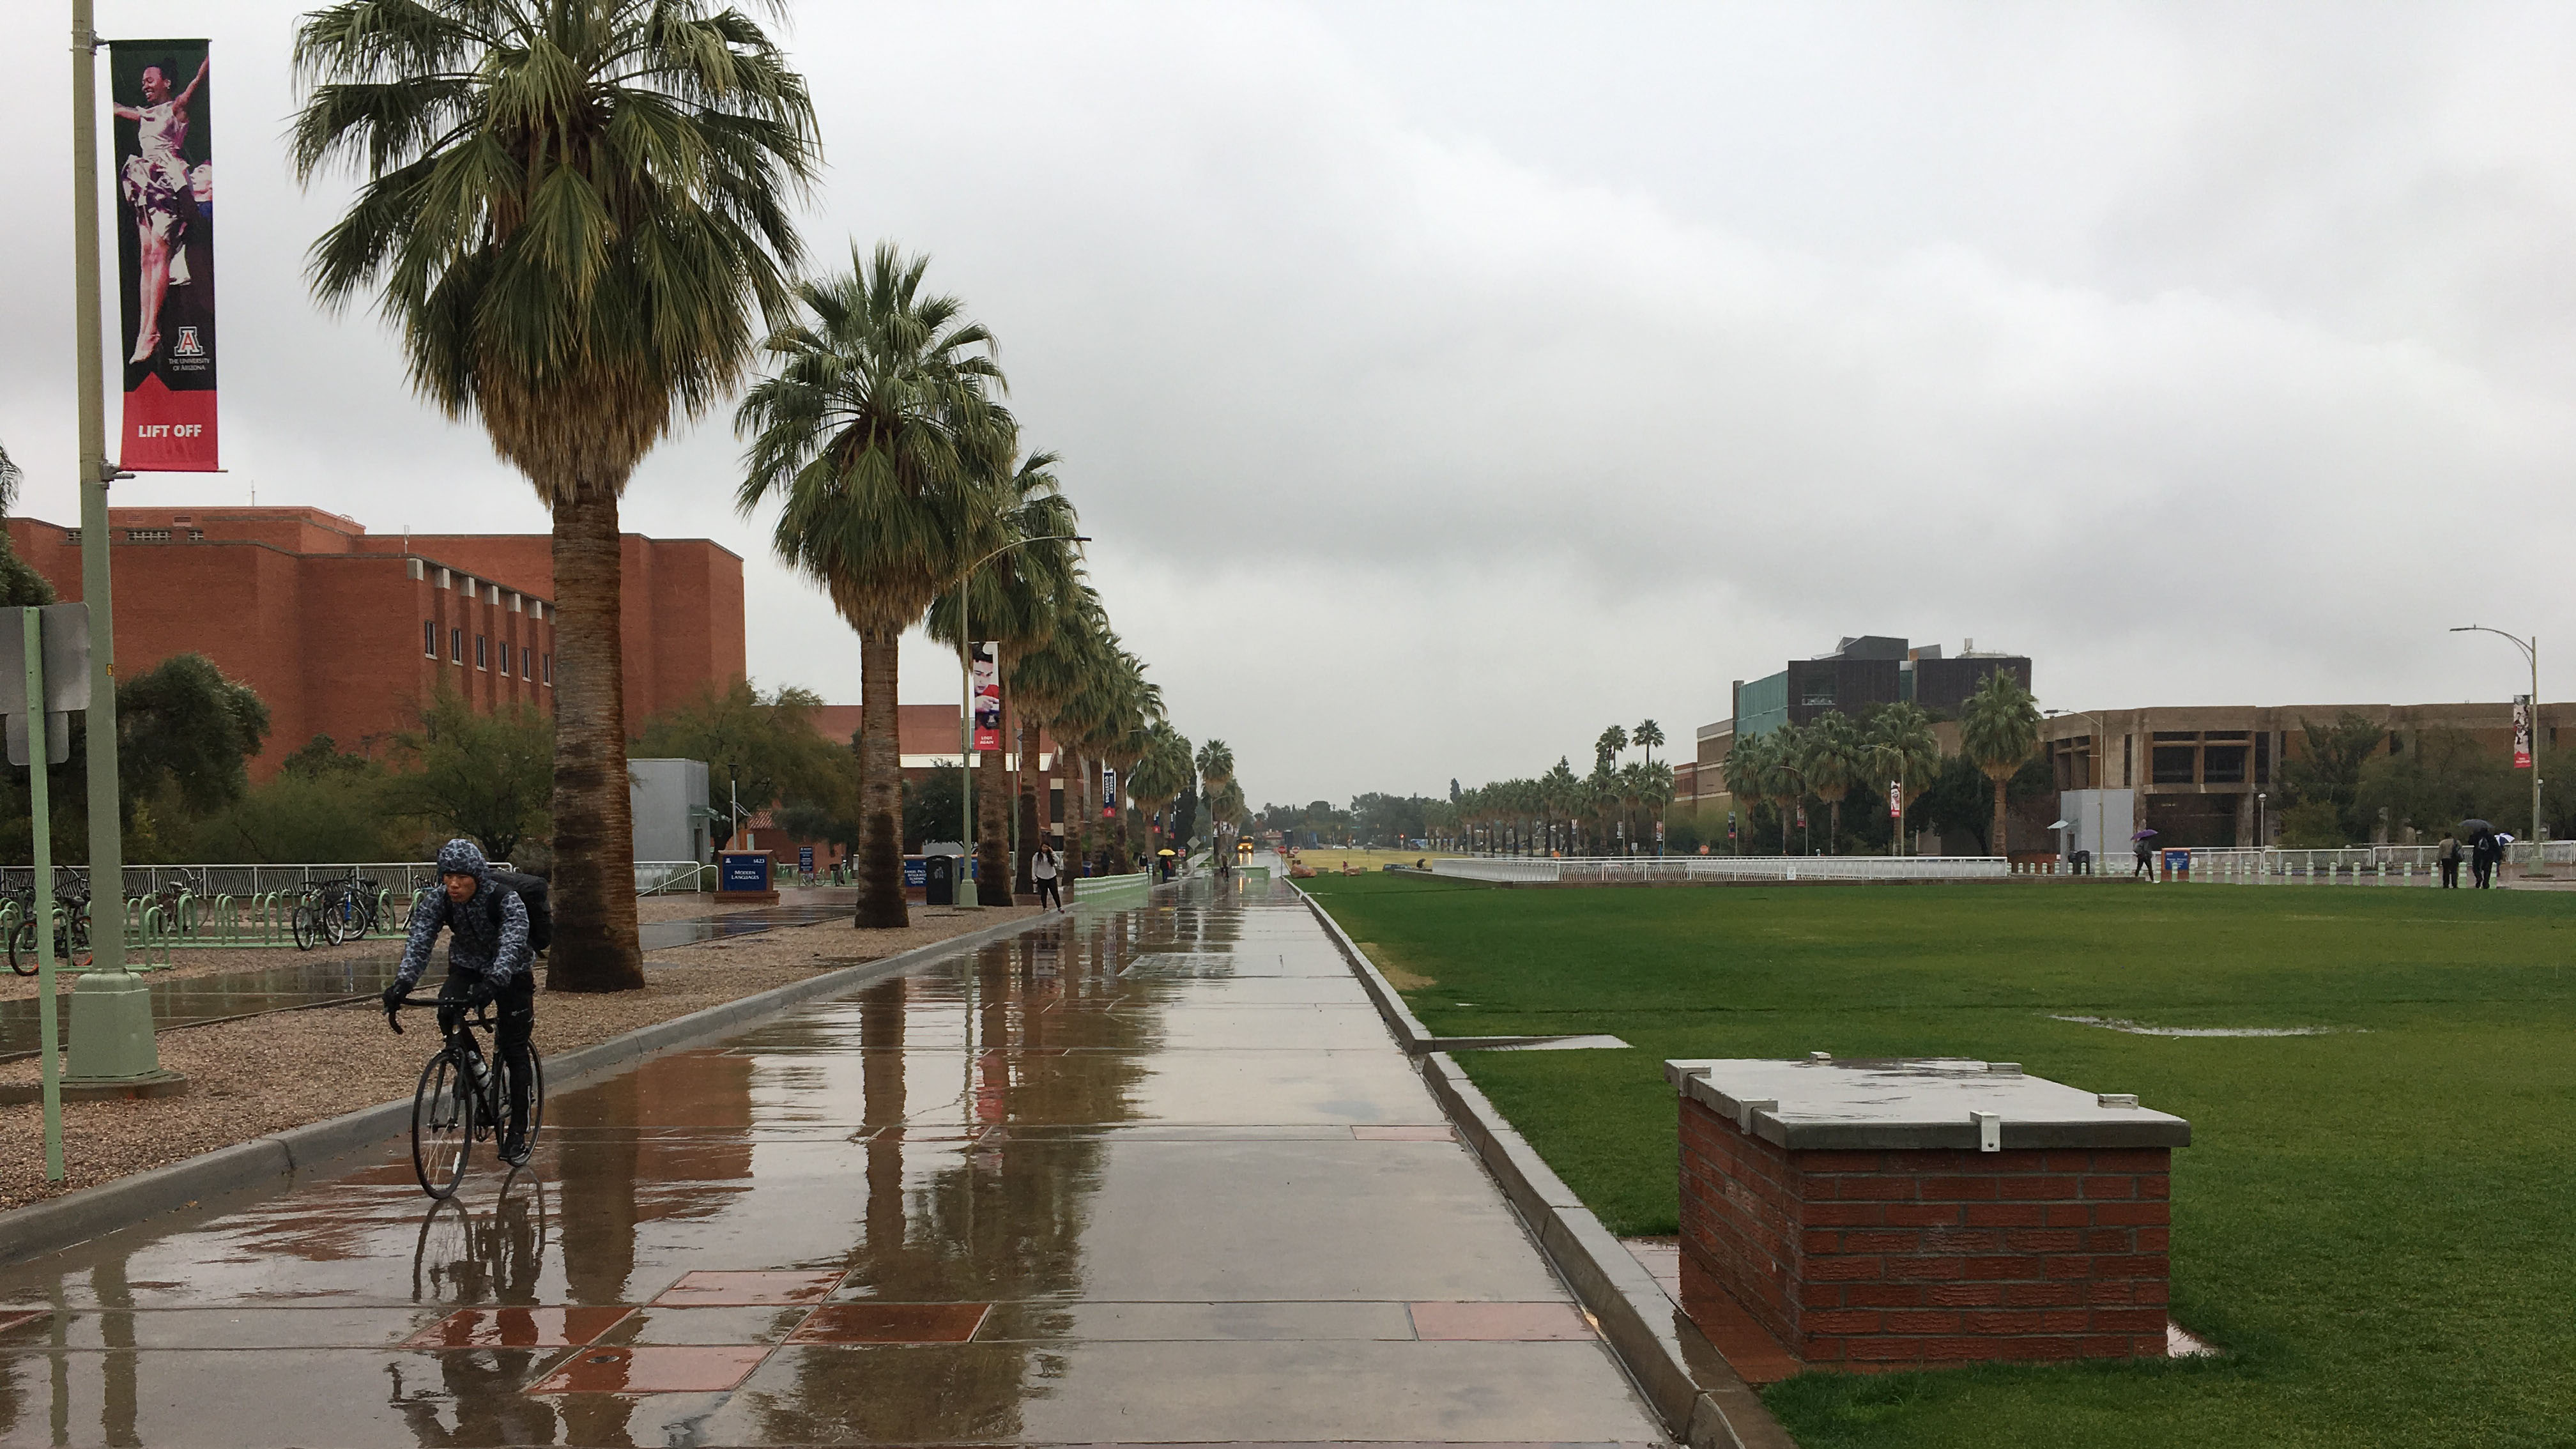 The University of Arizona campus was wet and grey after several days of rain in Feburary 2018.